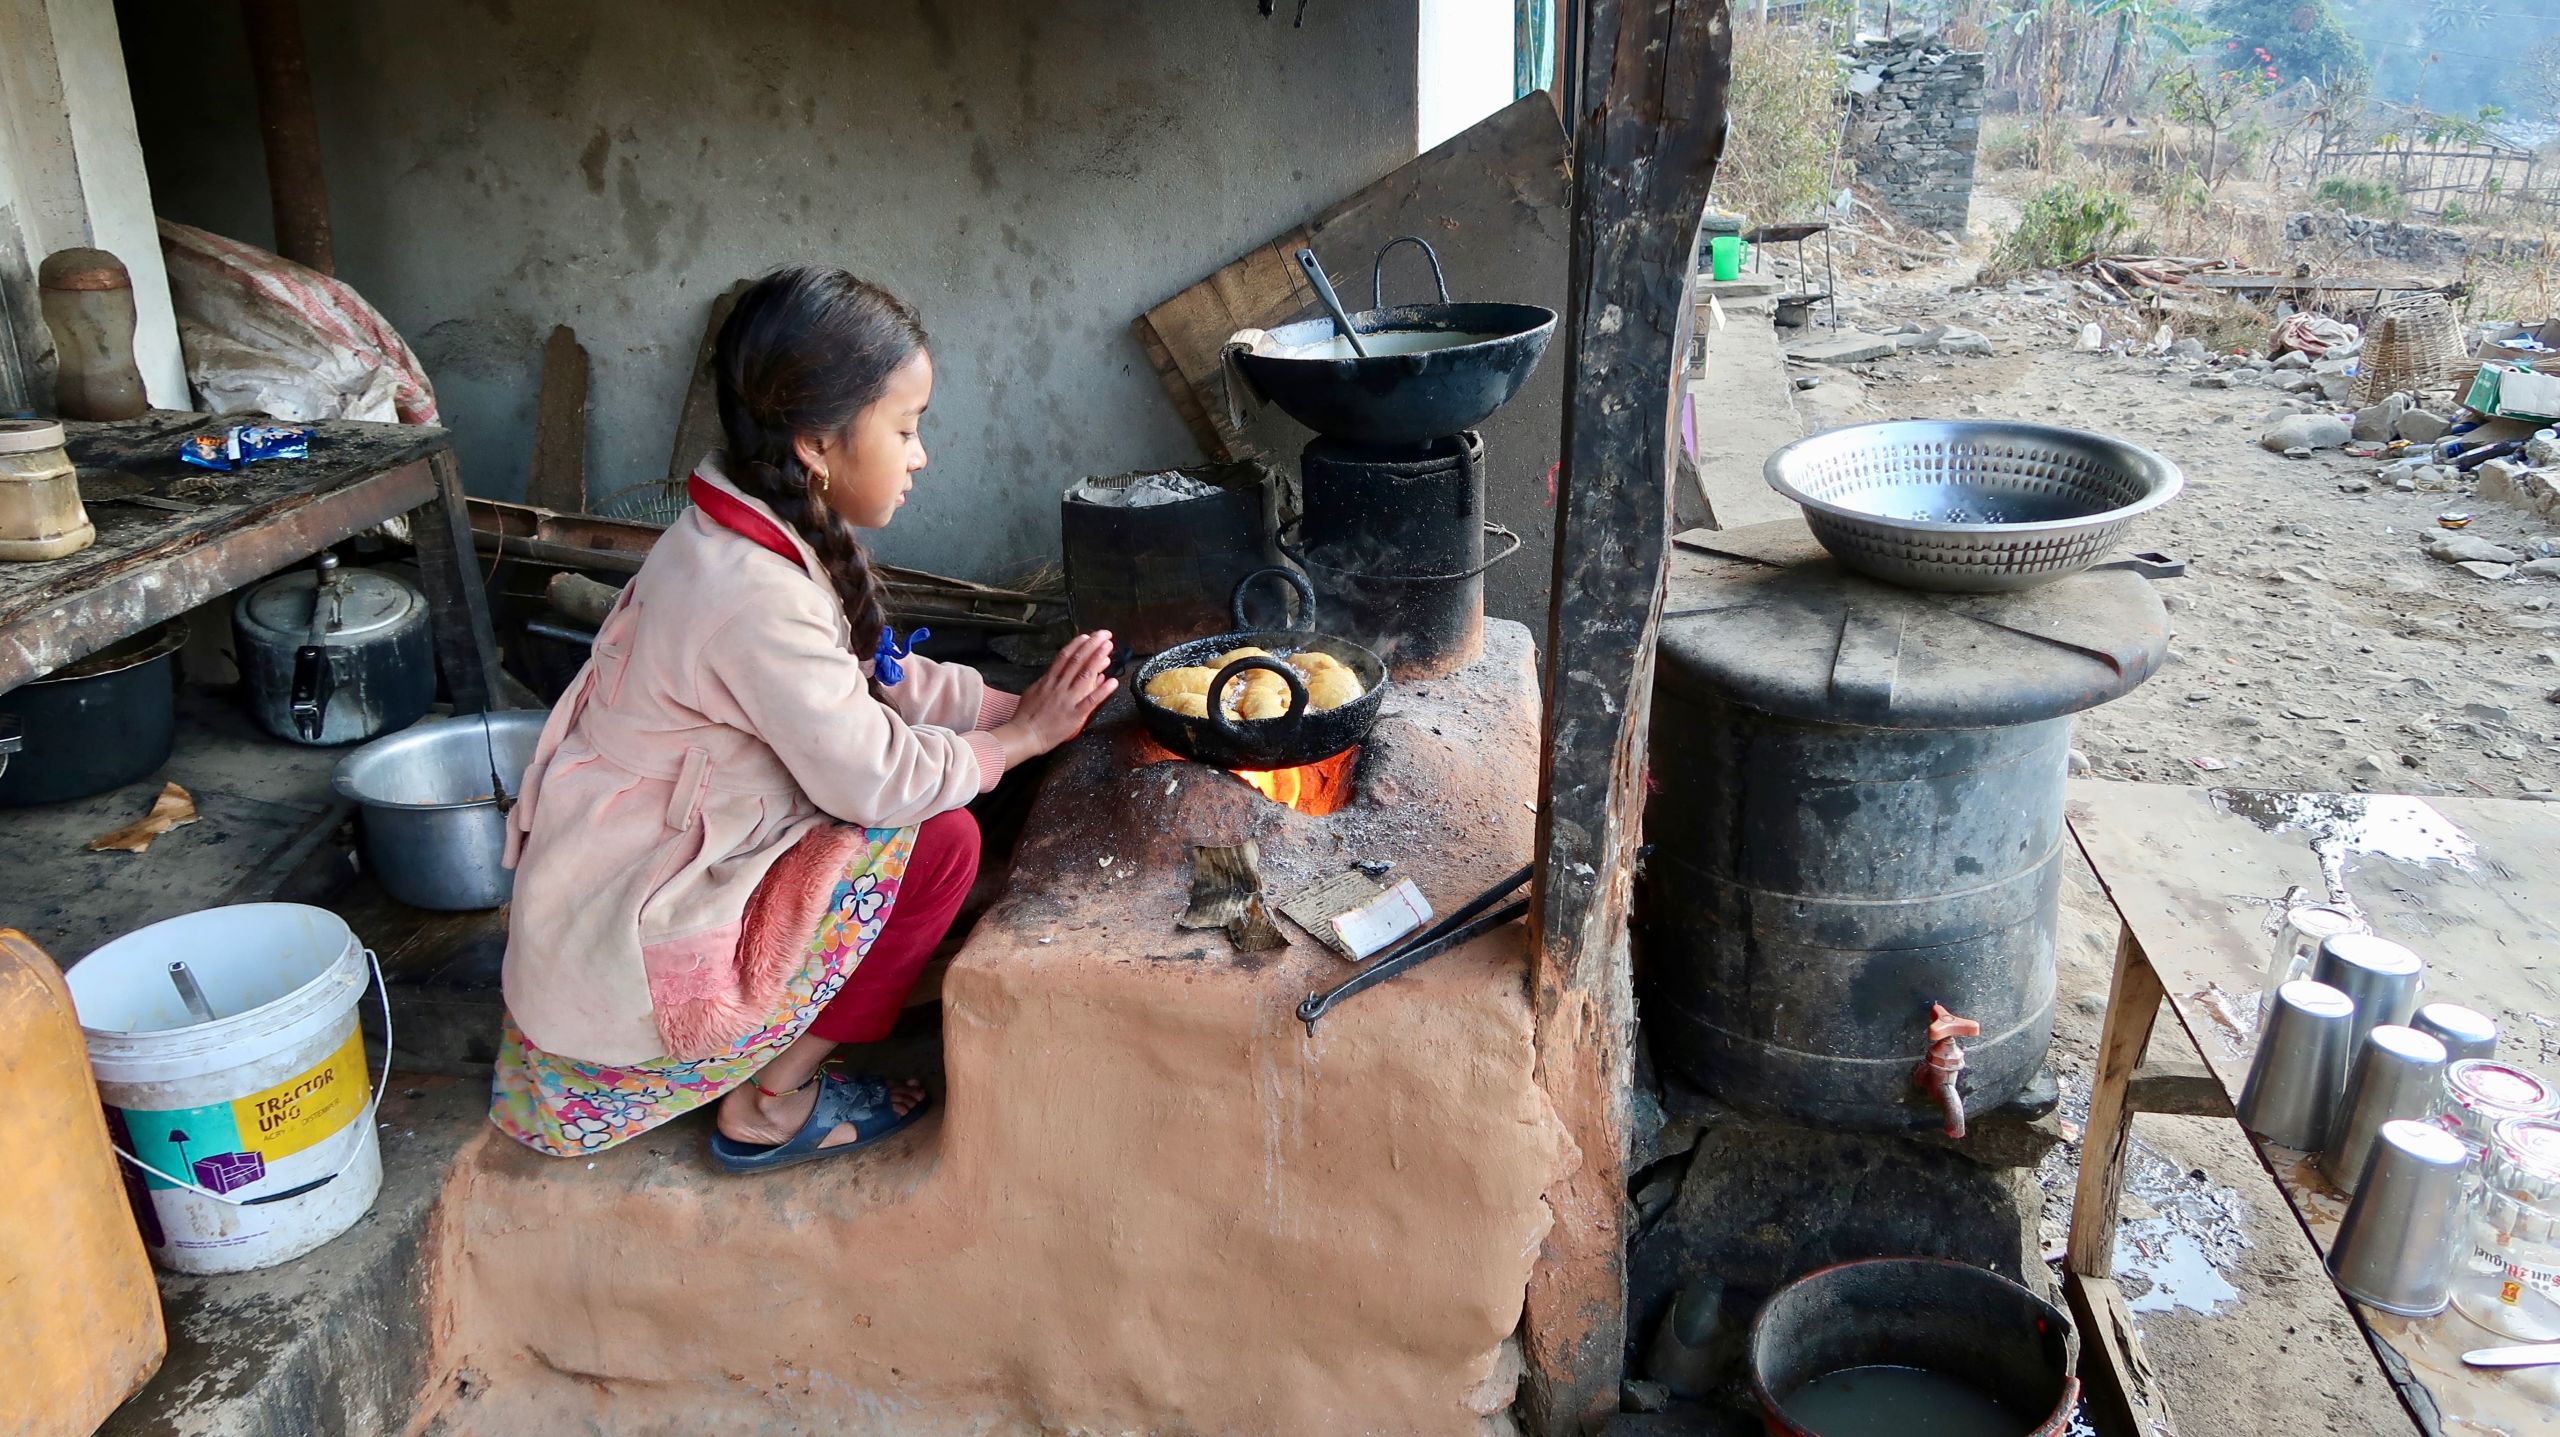 A girl cooking on an indoor stove in the Sindhupalchok District of Nepal.